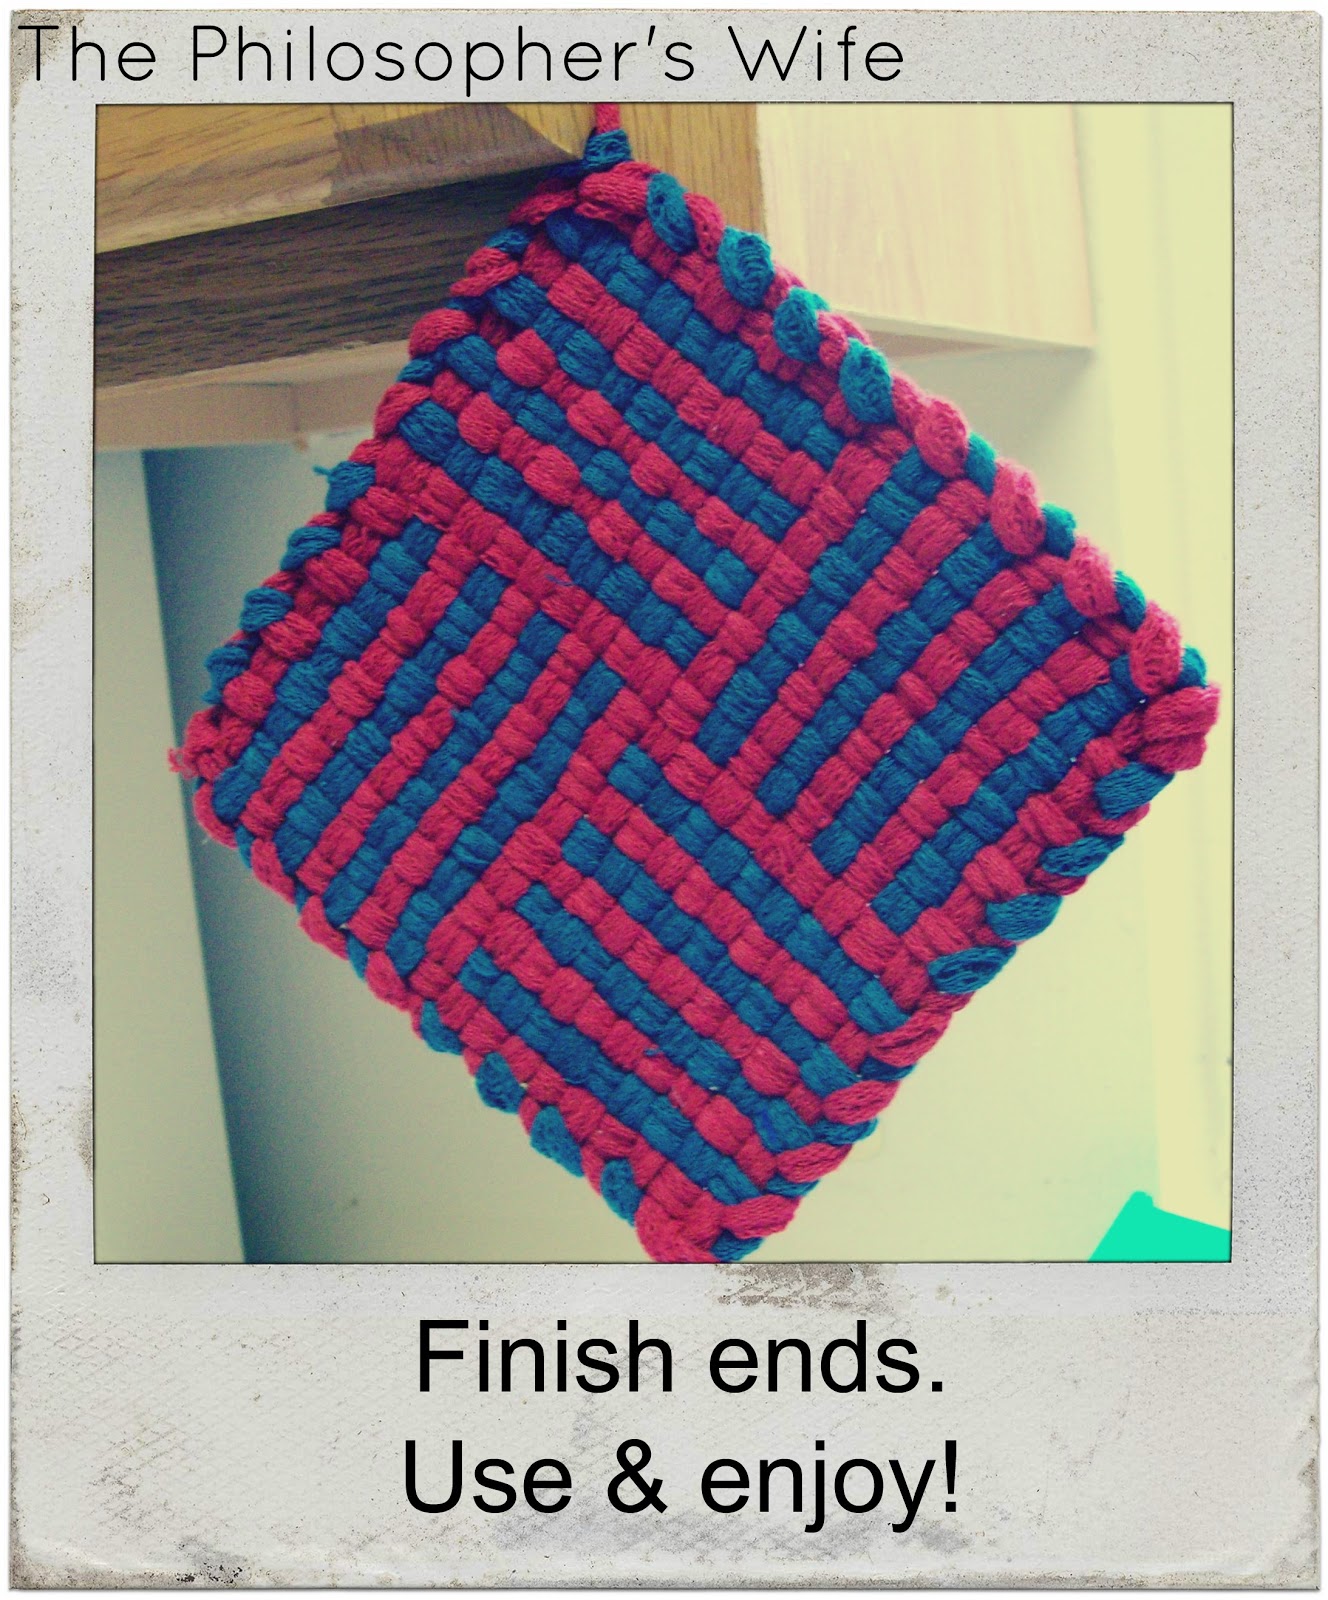 Today's Creations: Pot Holders on a Loom, Taking them to the next level!